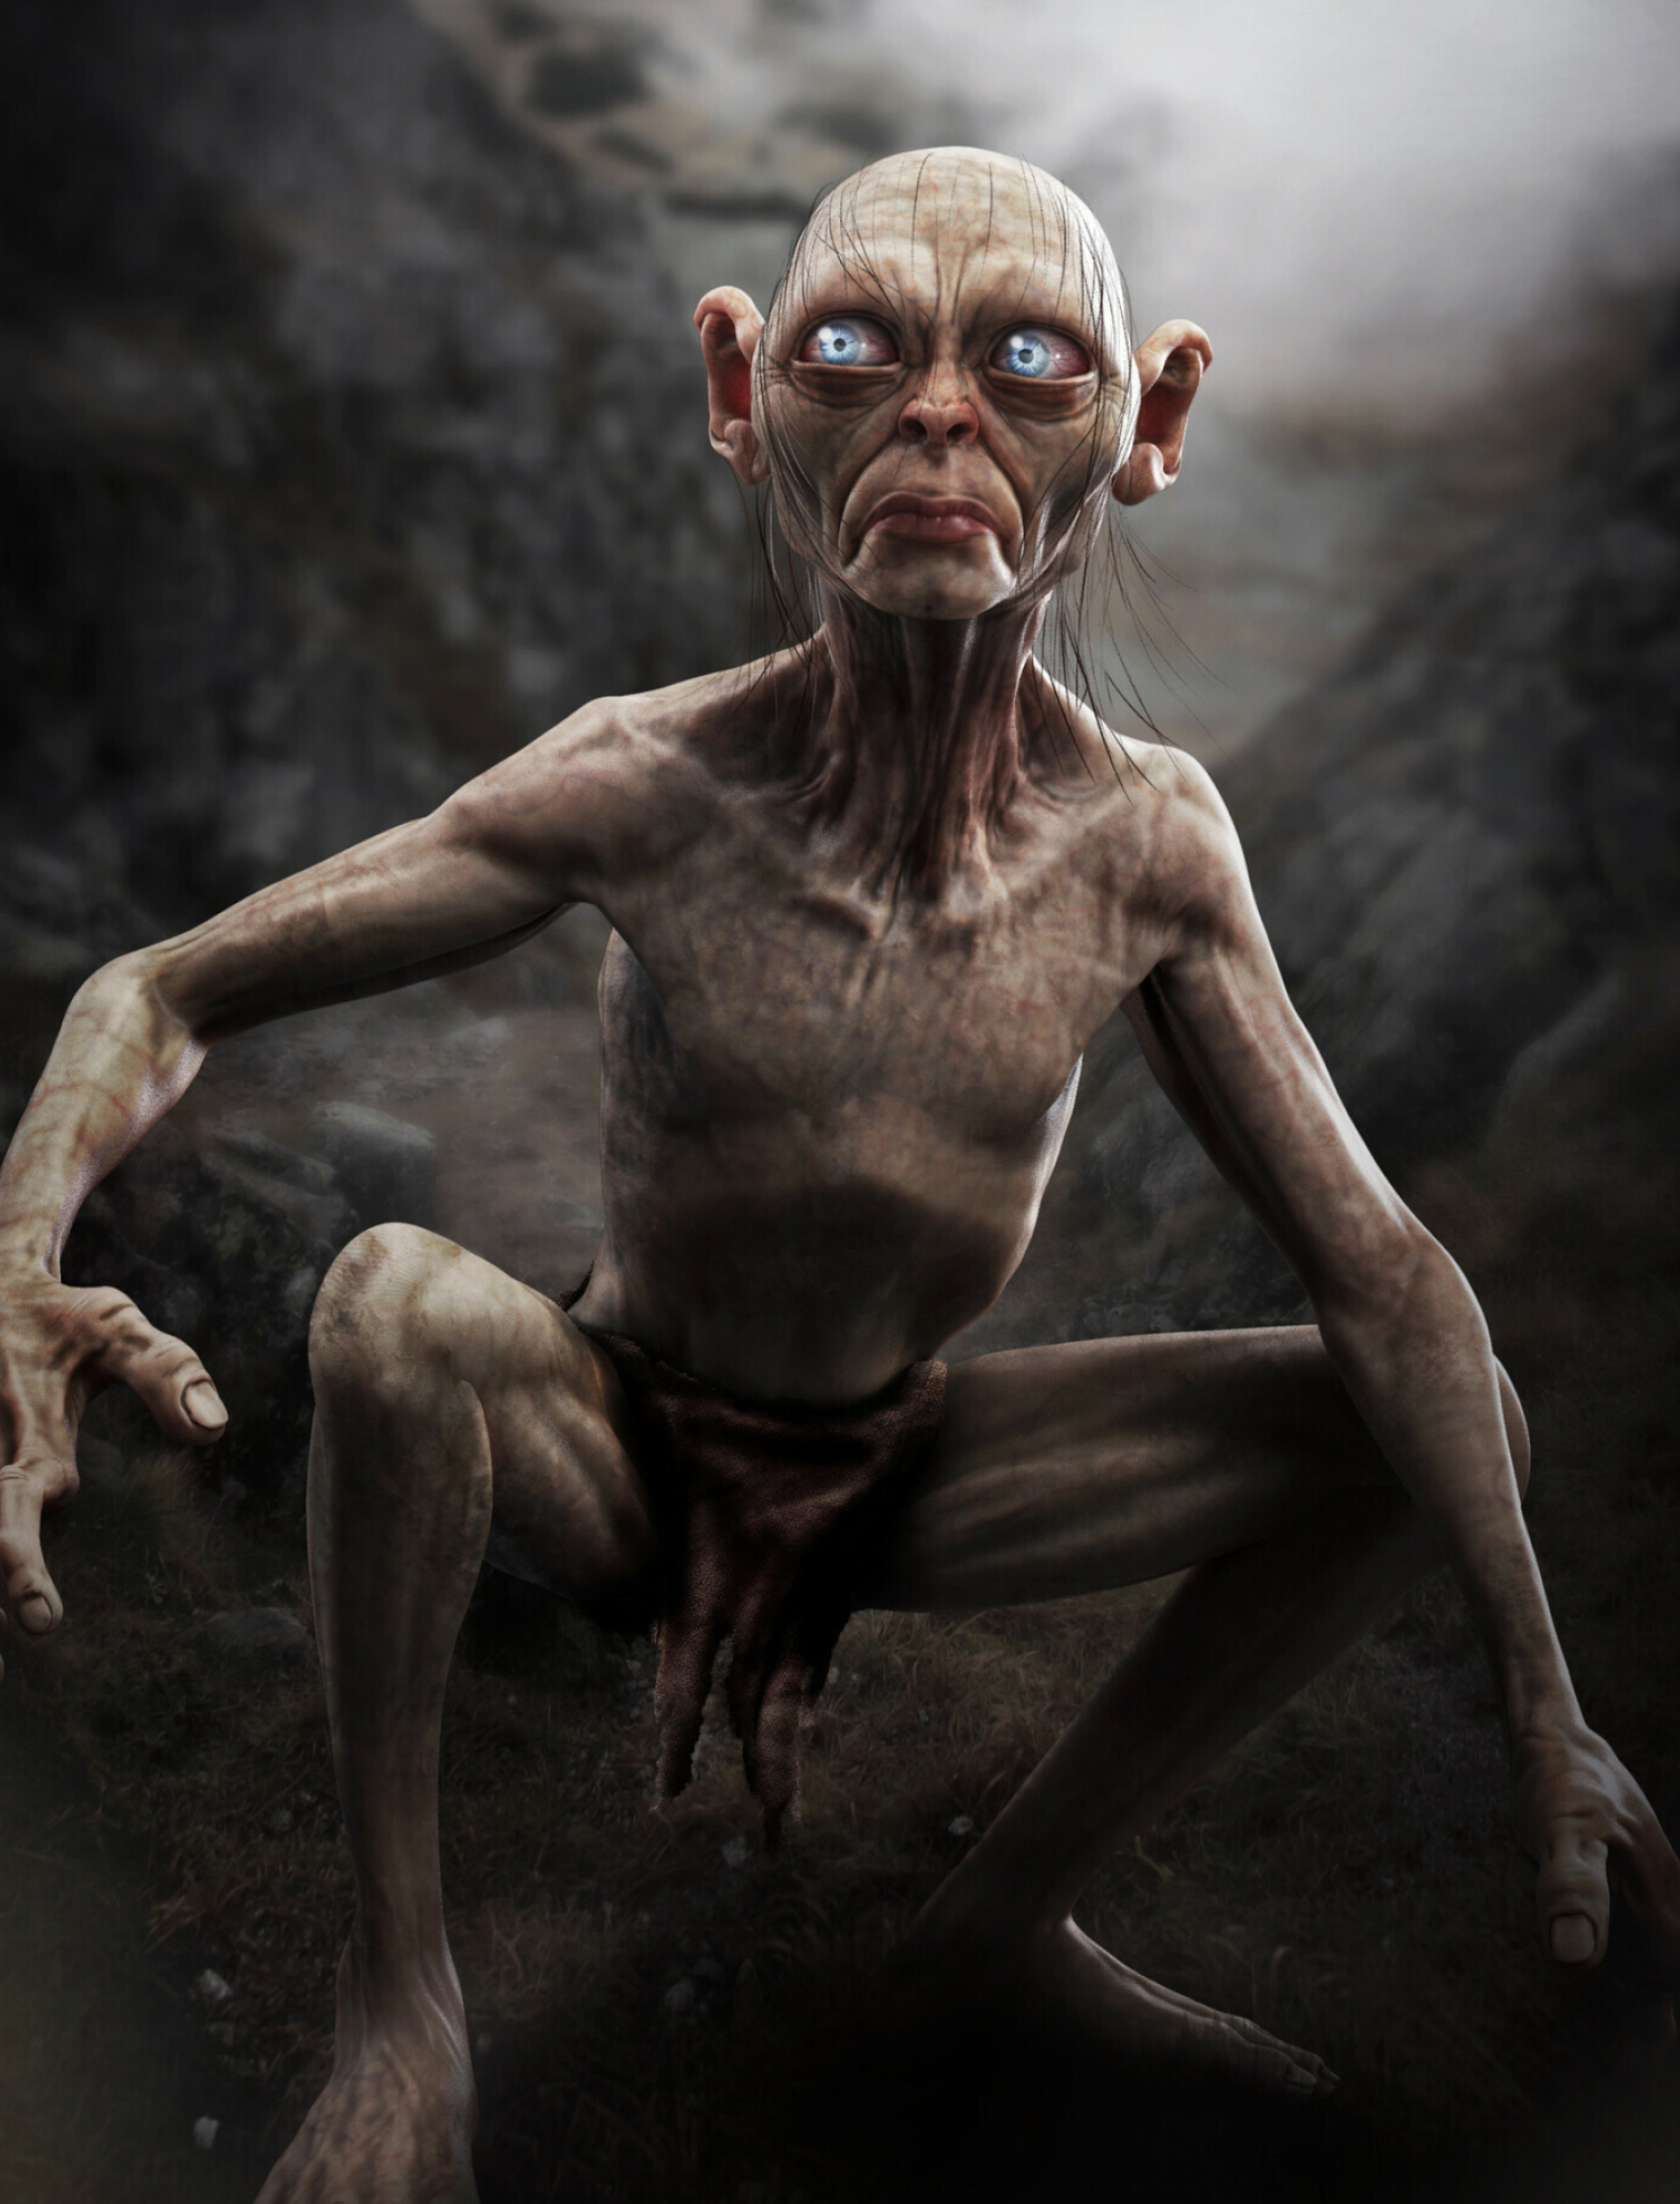 Niclas Dreier's sculpture, Gollum from Lord of the Rings, Artistic interpretation, Middle-earth, 1920x2520 HD Phone